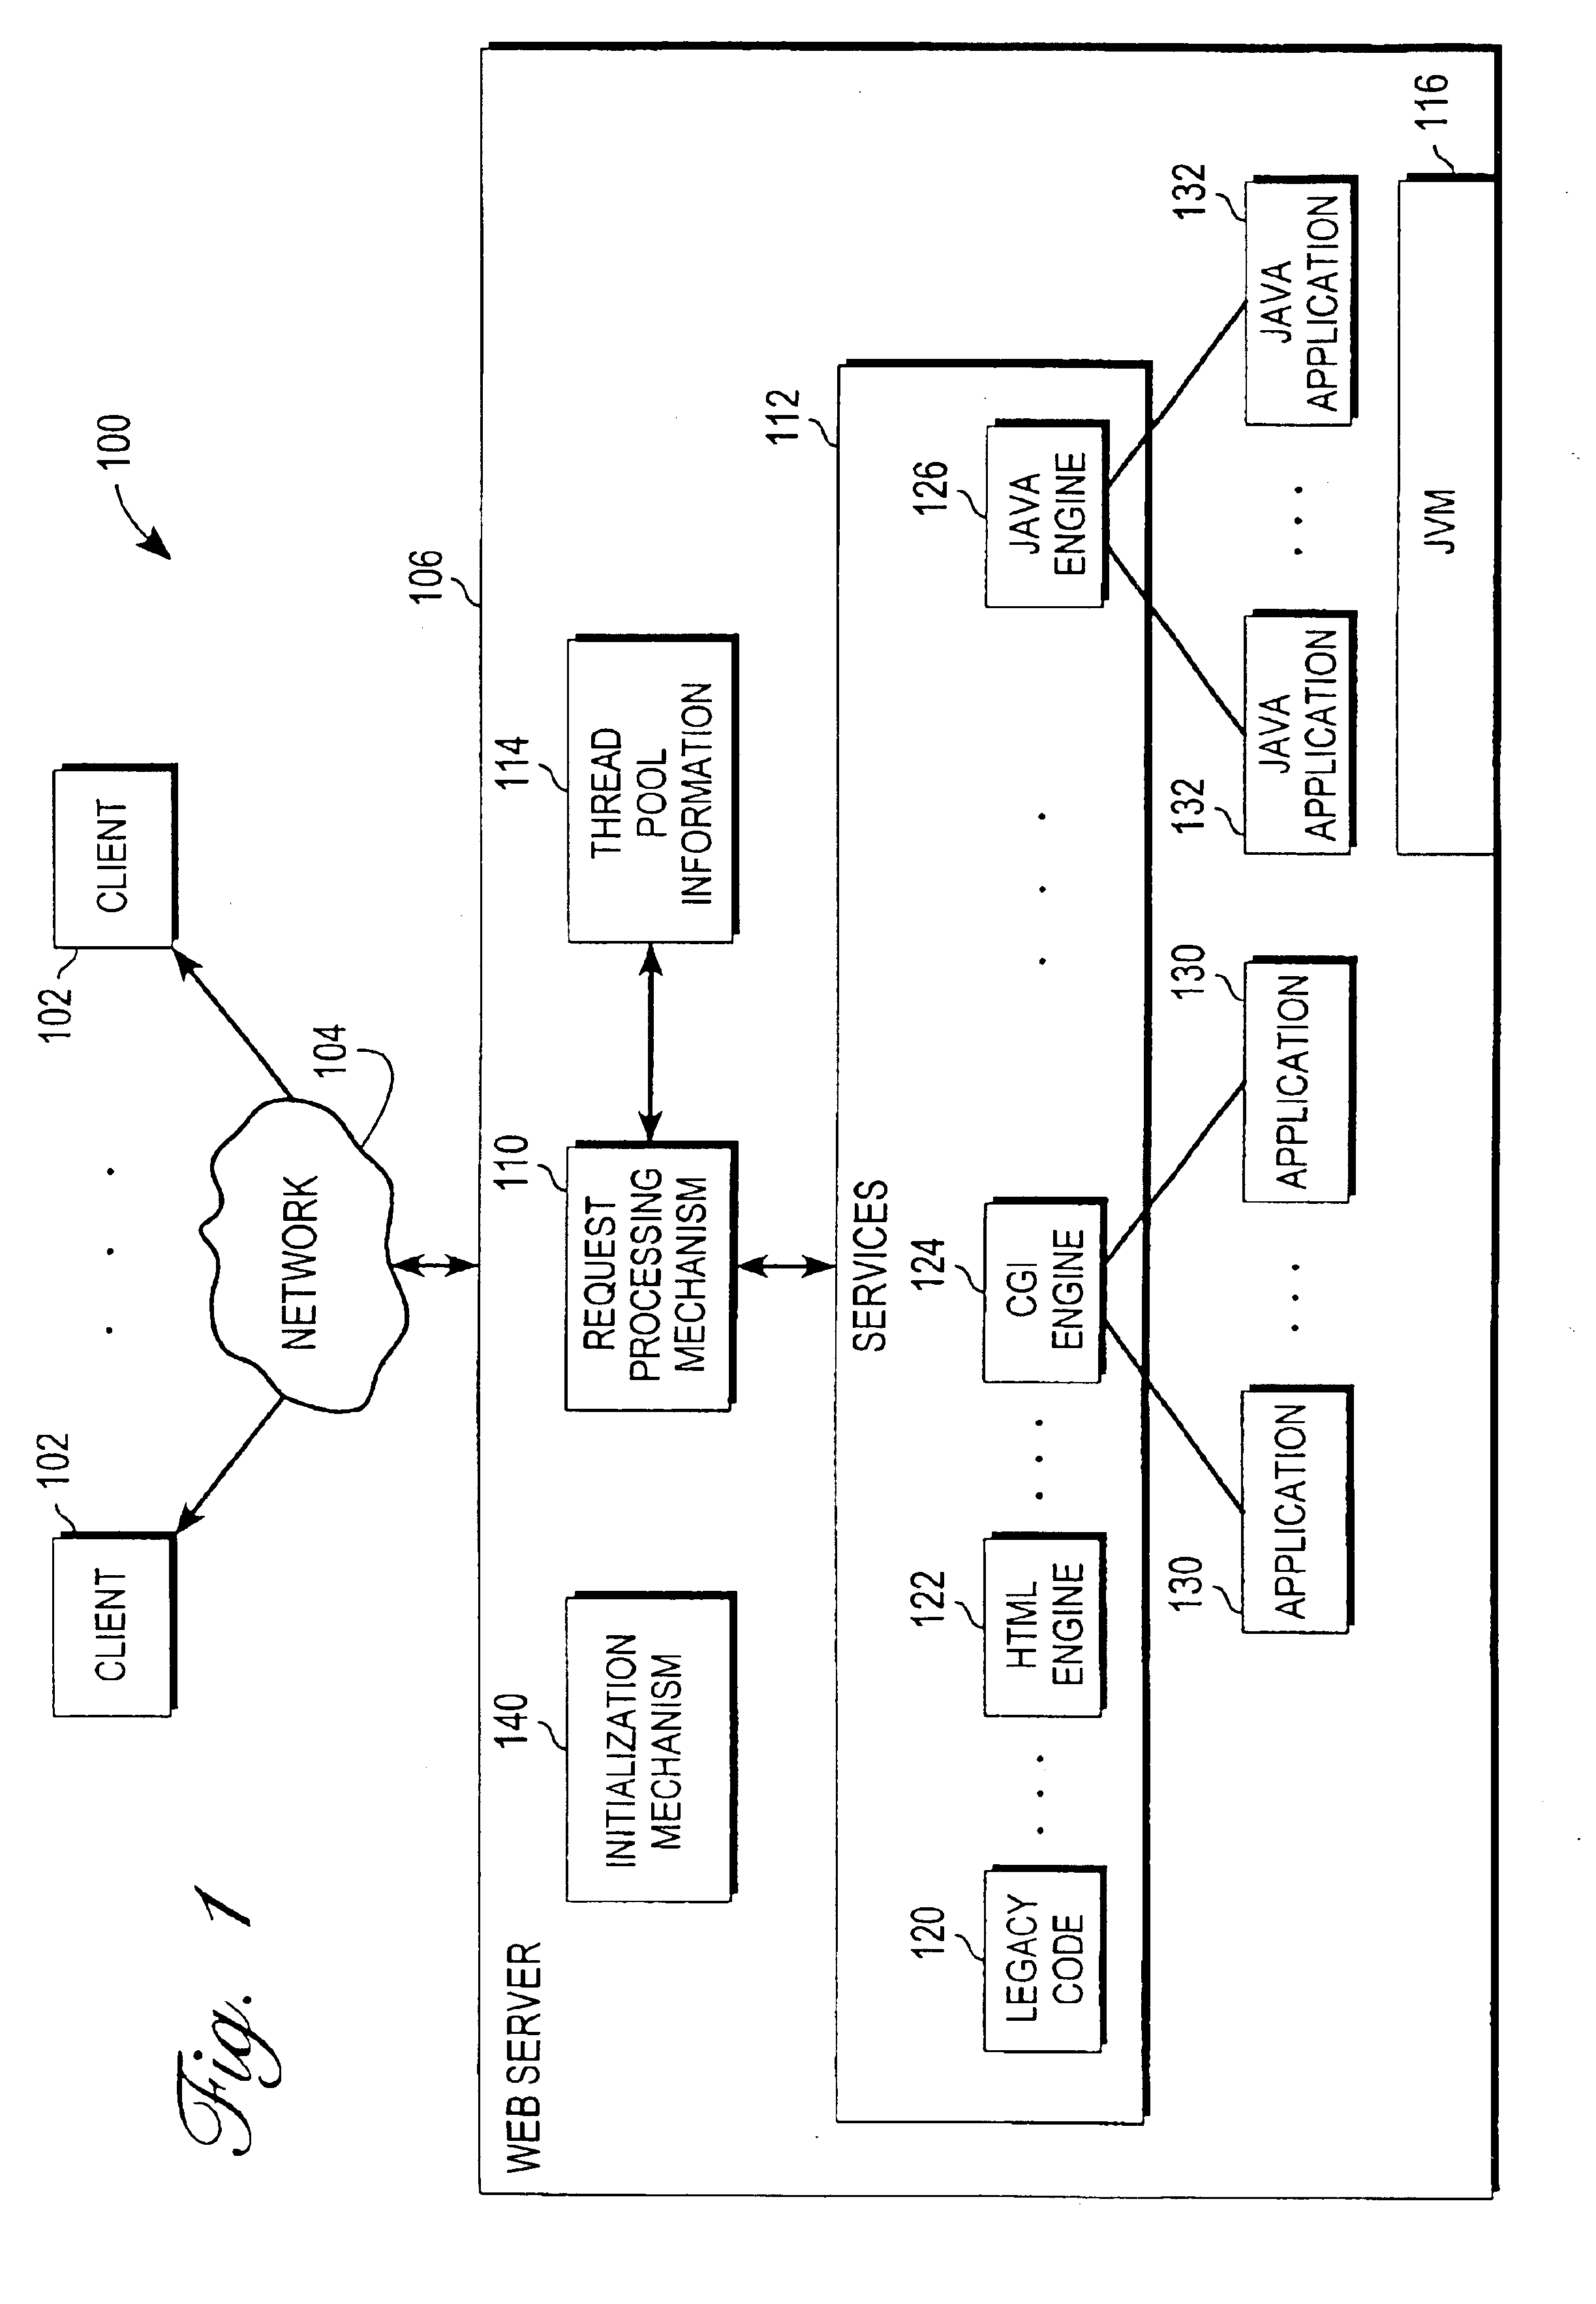 Mechanism for evaluating requests prior to disposition in a multi-threaded environment